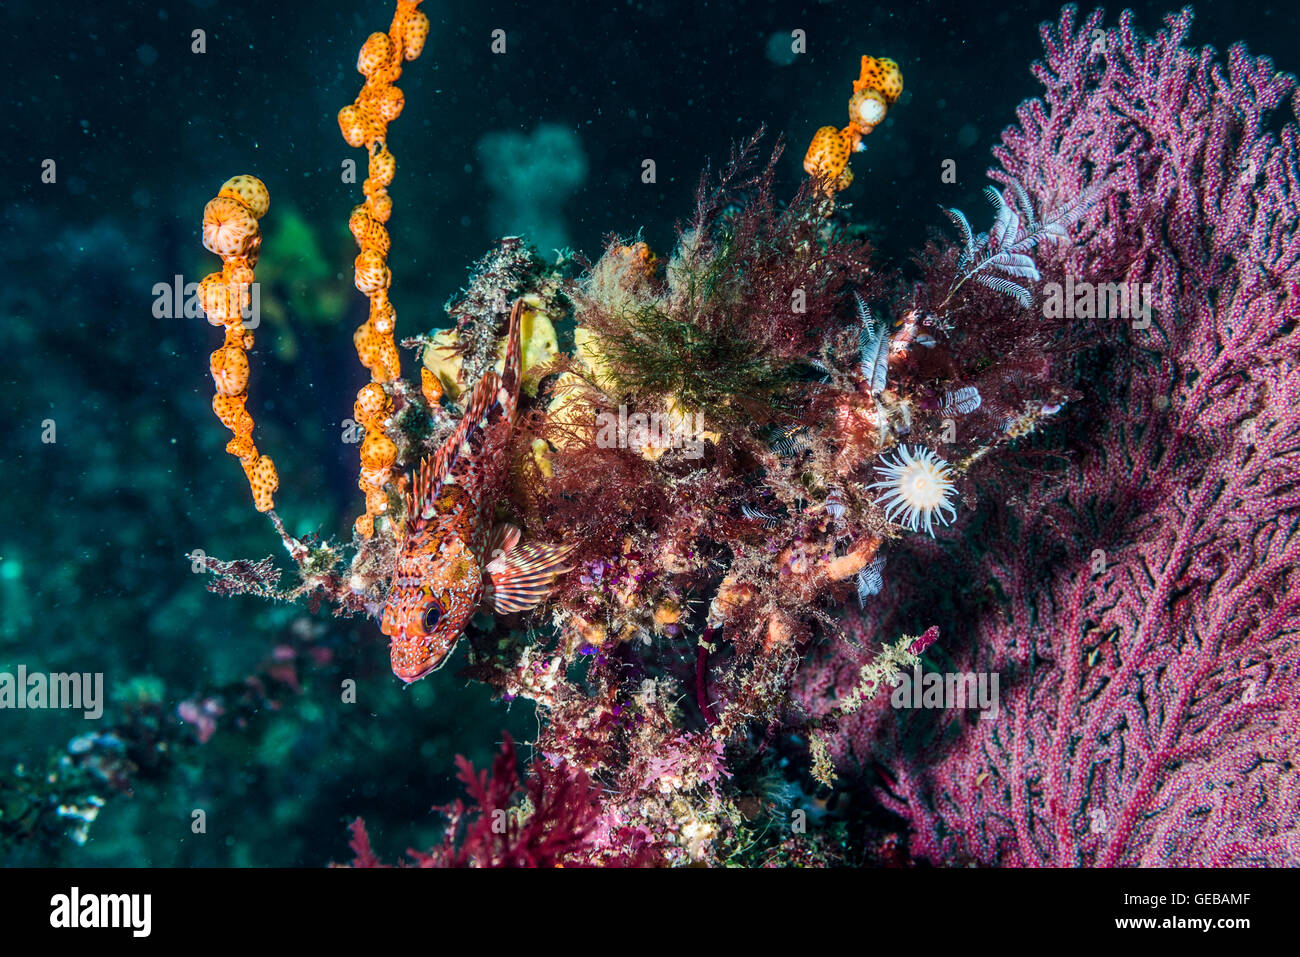 Rockfish with the gorgonian wrapper sea anemone.  Depth 23m. Stock Photo